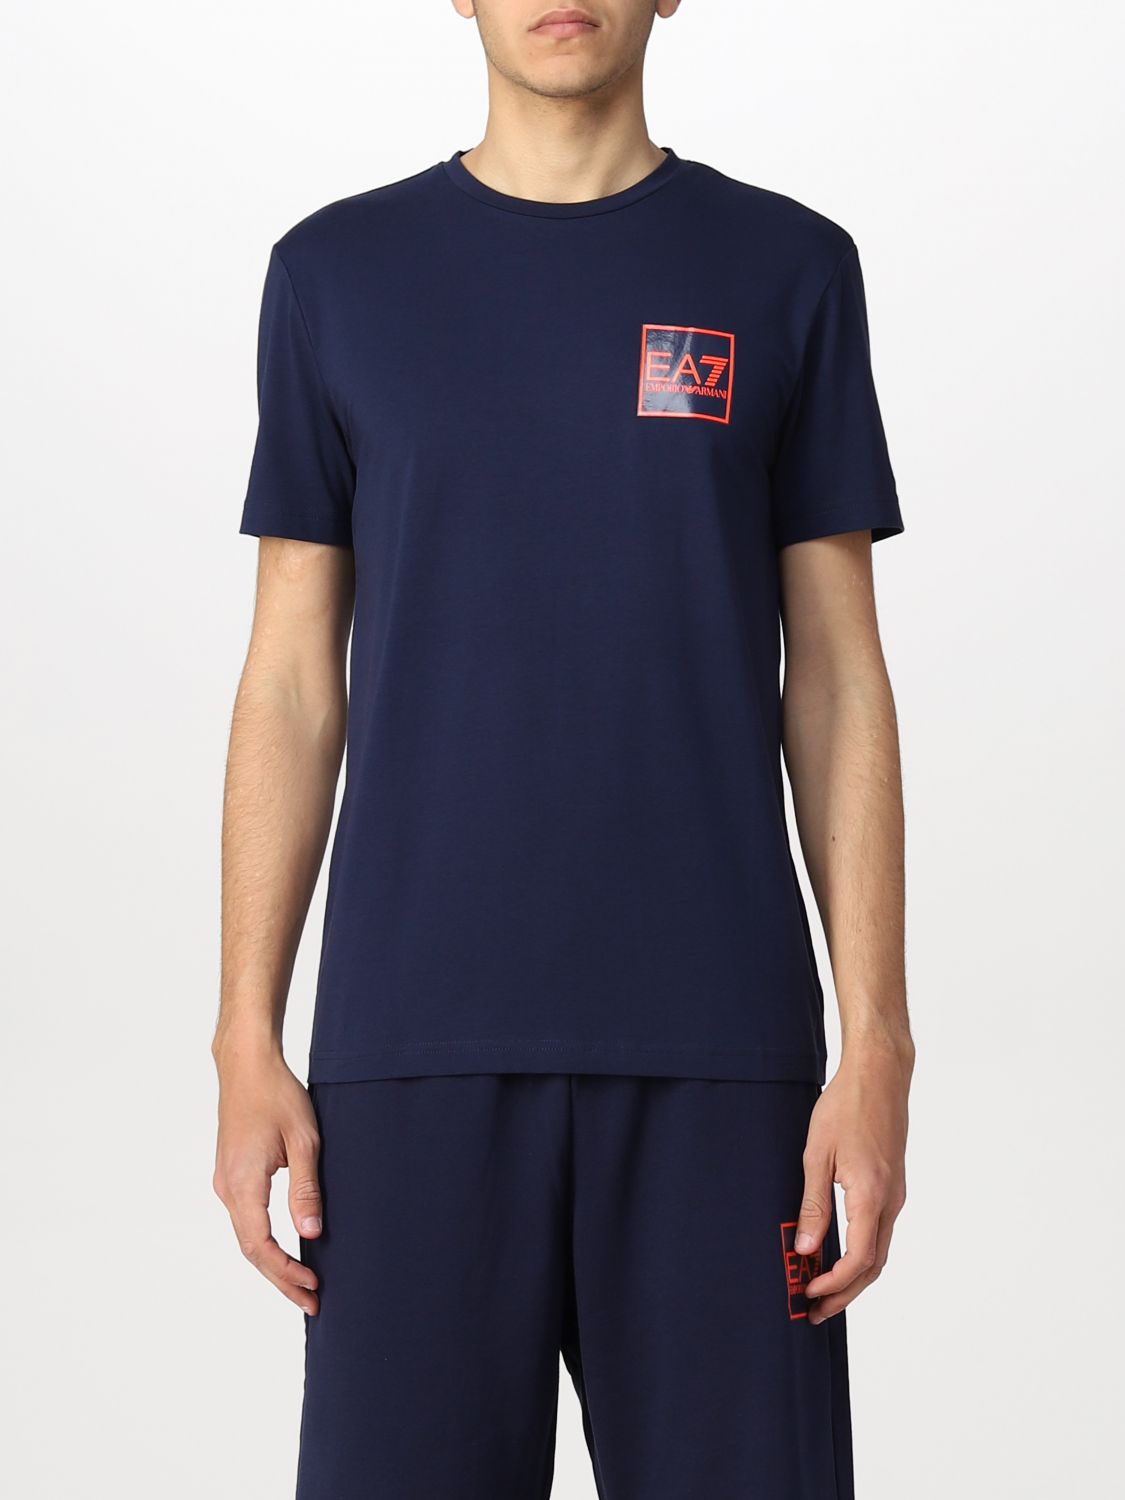 Ea7 T-shirt With Logo In Navy